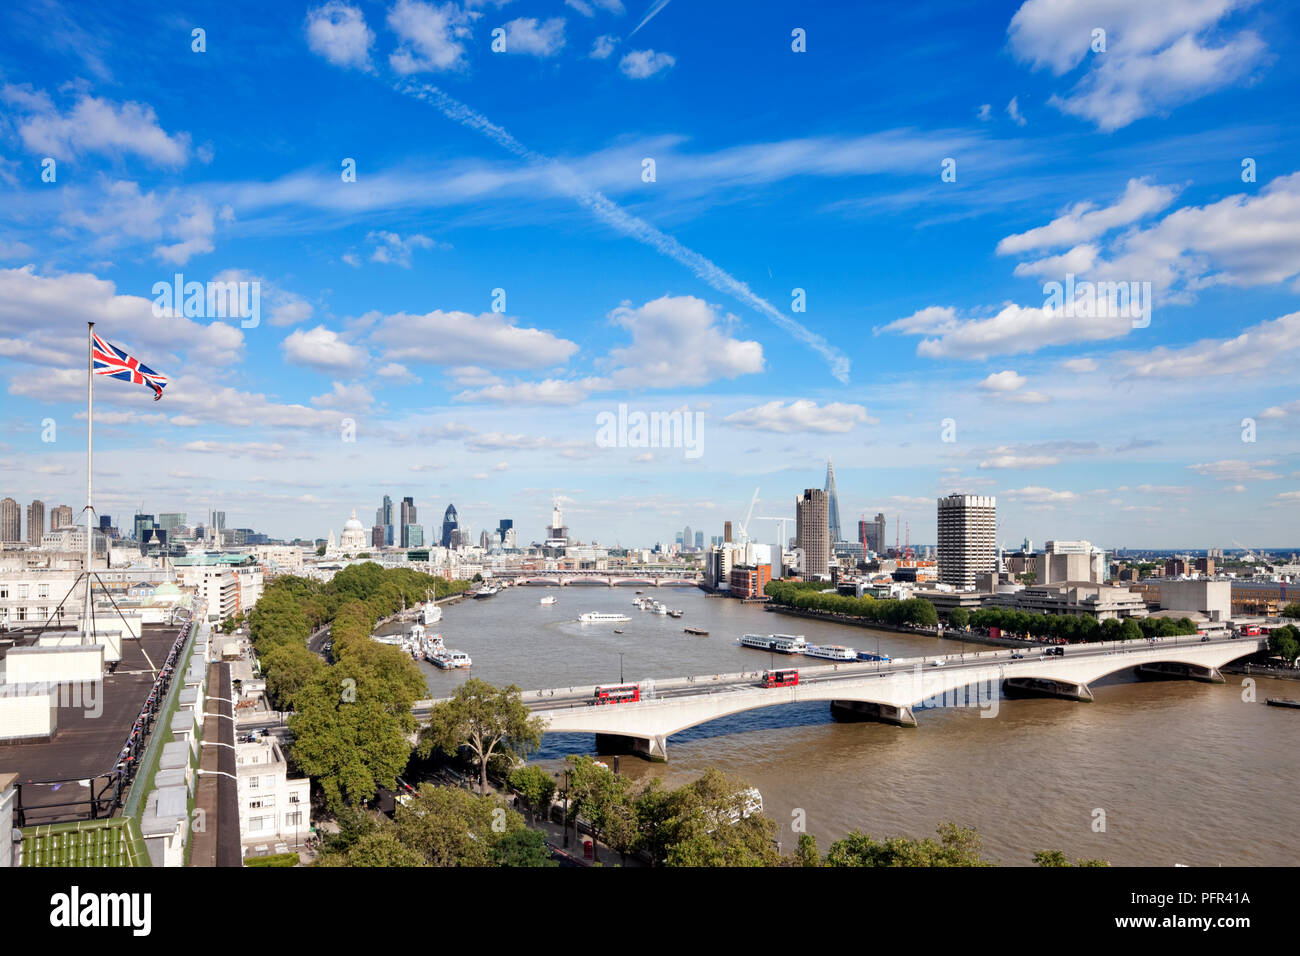 Great Britain, England, London, elevated view of city skyline, roof of Savoy Hotel on the left, Waterloo Bridge in the foreground Stock Photo